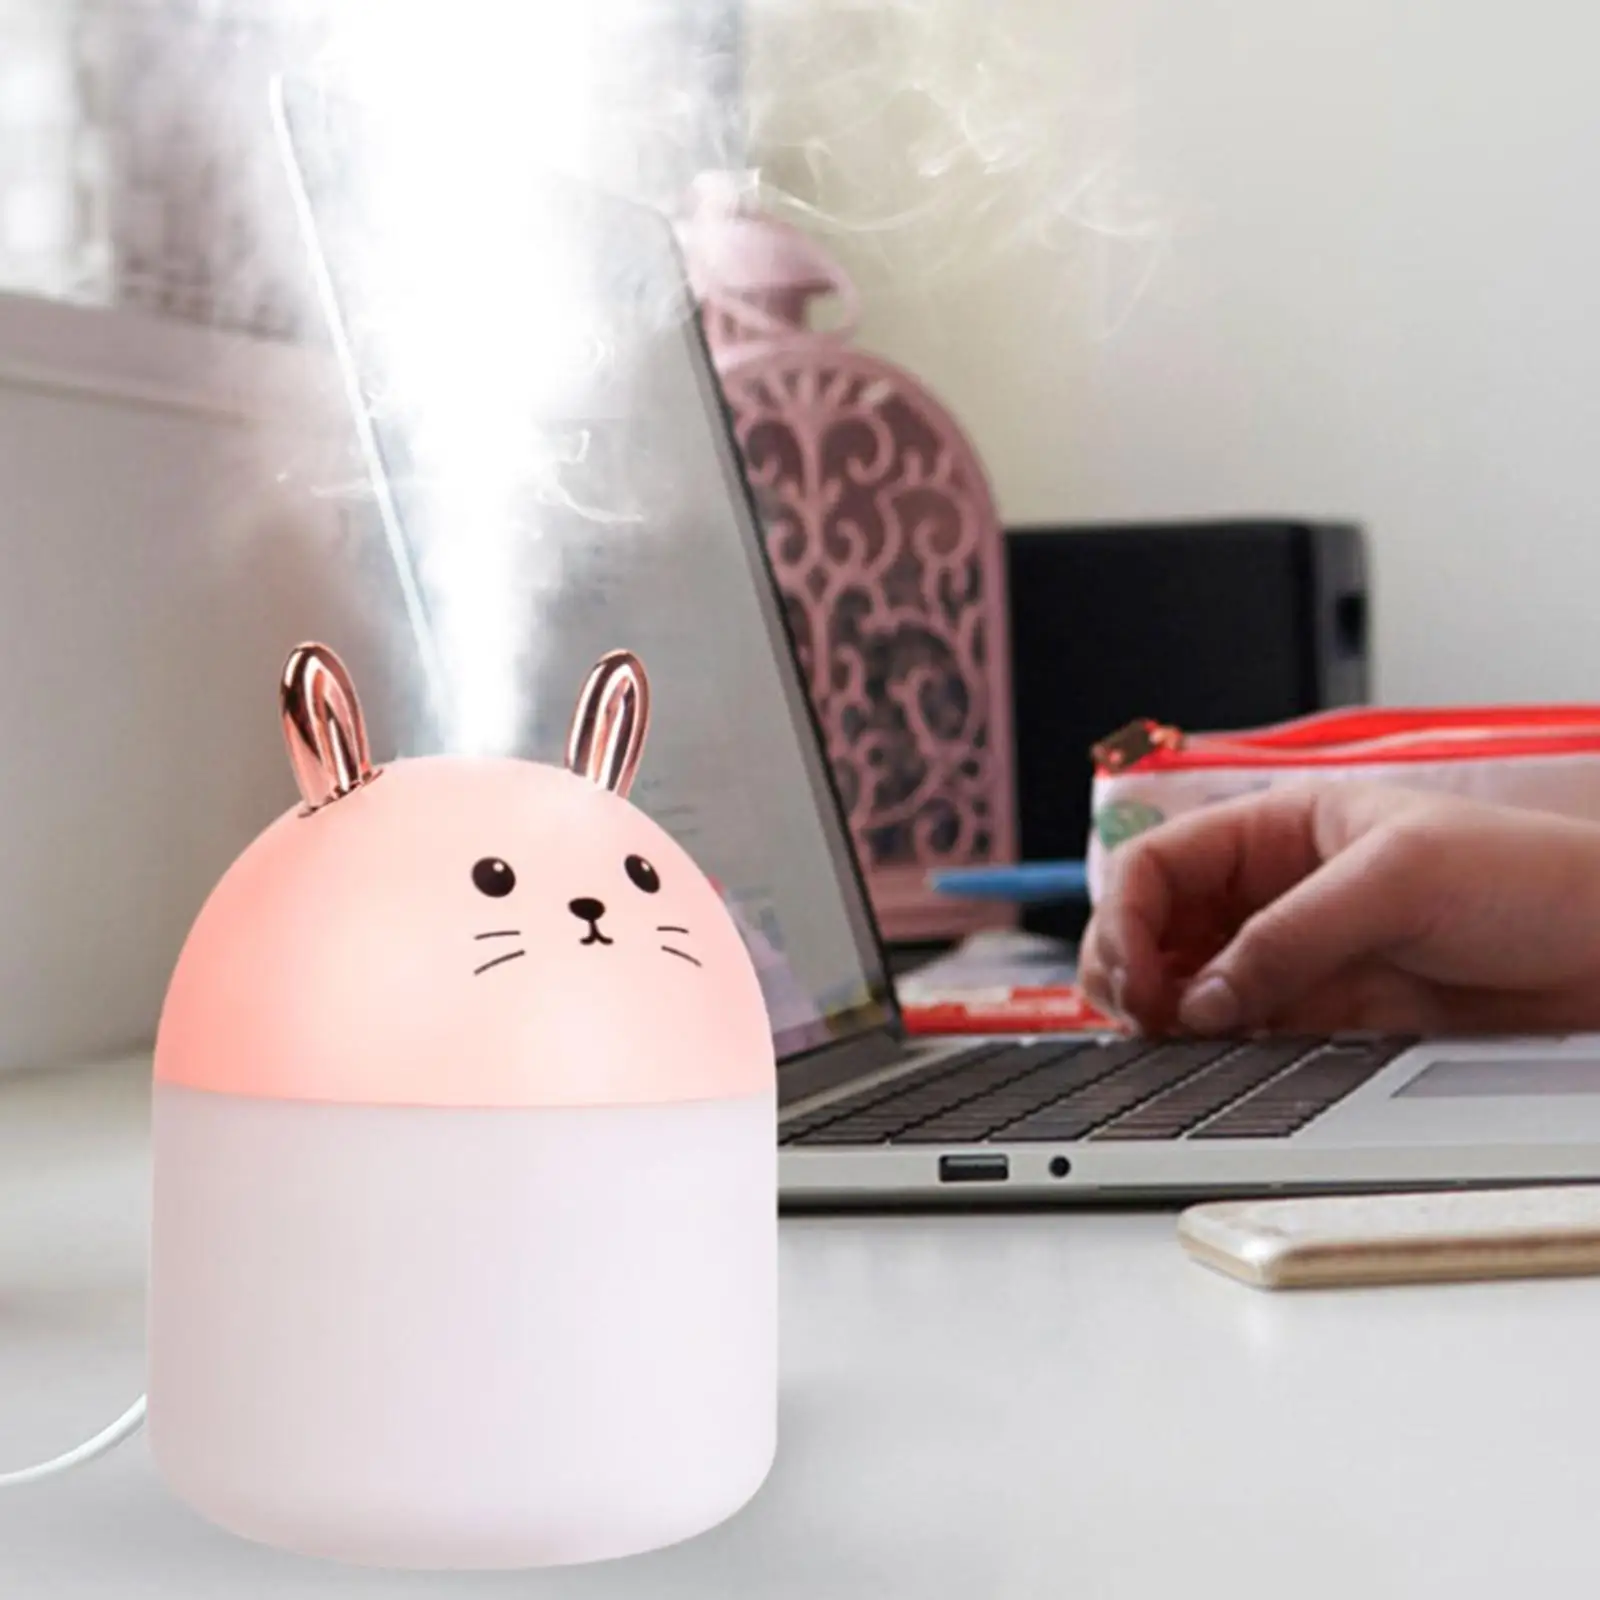 250ml Mall Air Humidifier Water Tank USB Essential Oil Aroma Diffuser Ultrasonic Fog Steam for Household Desktop Living Room 